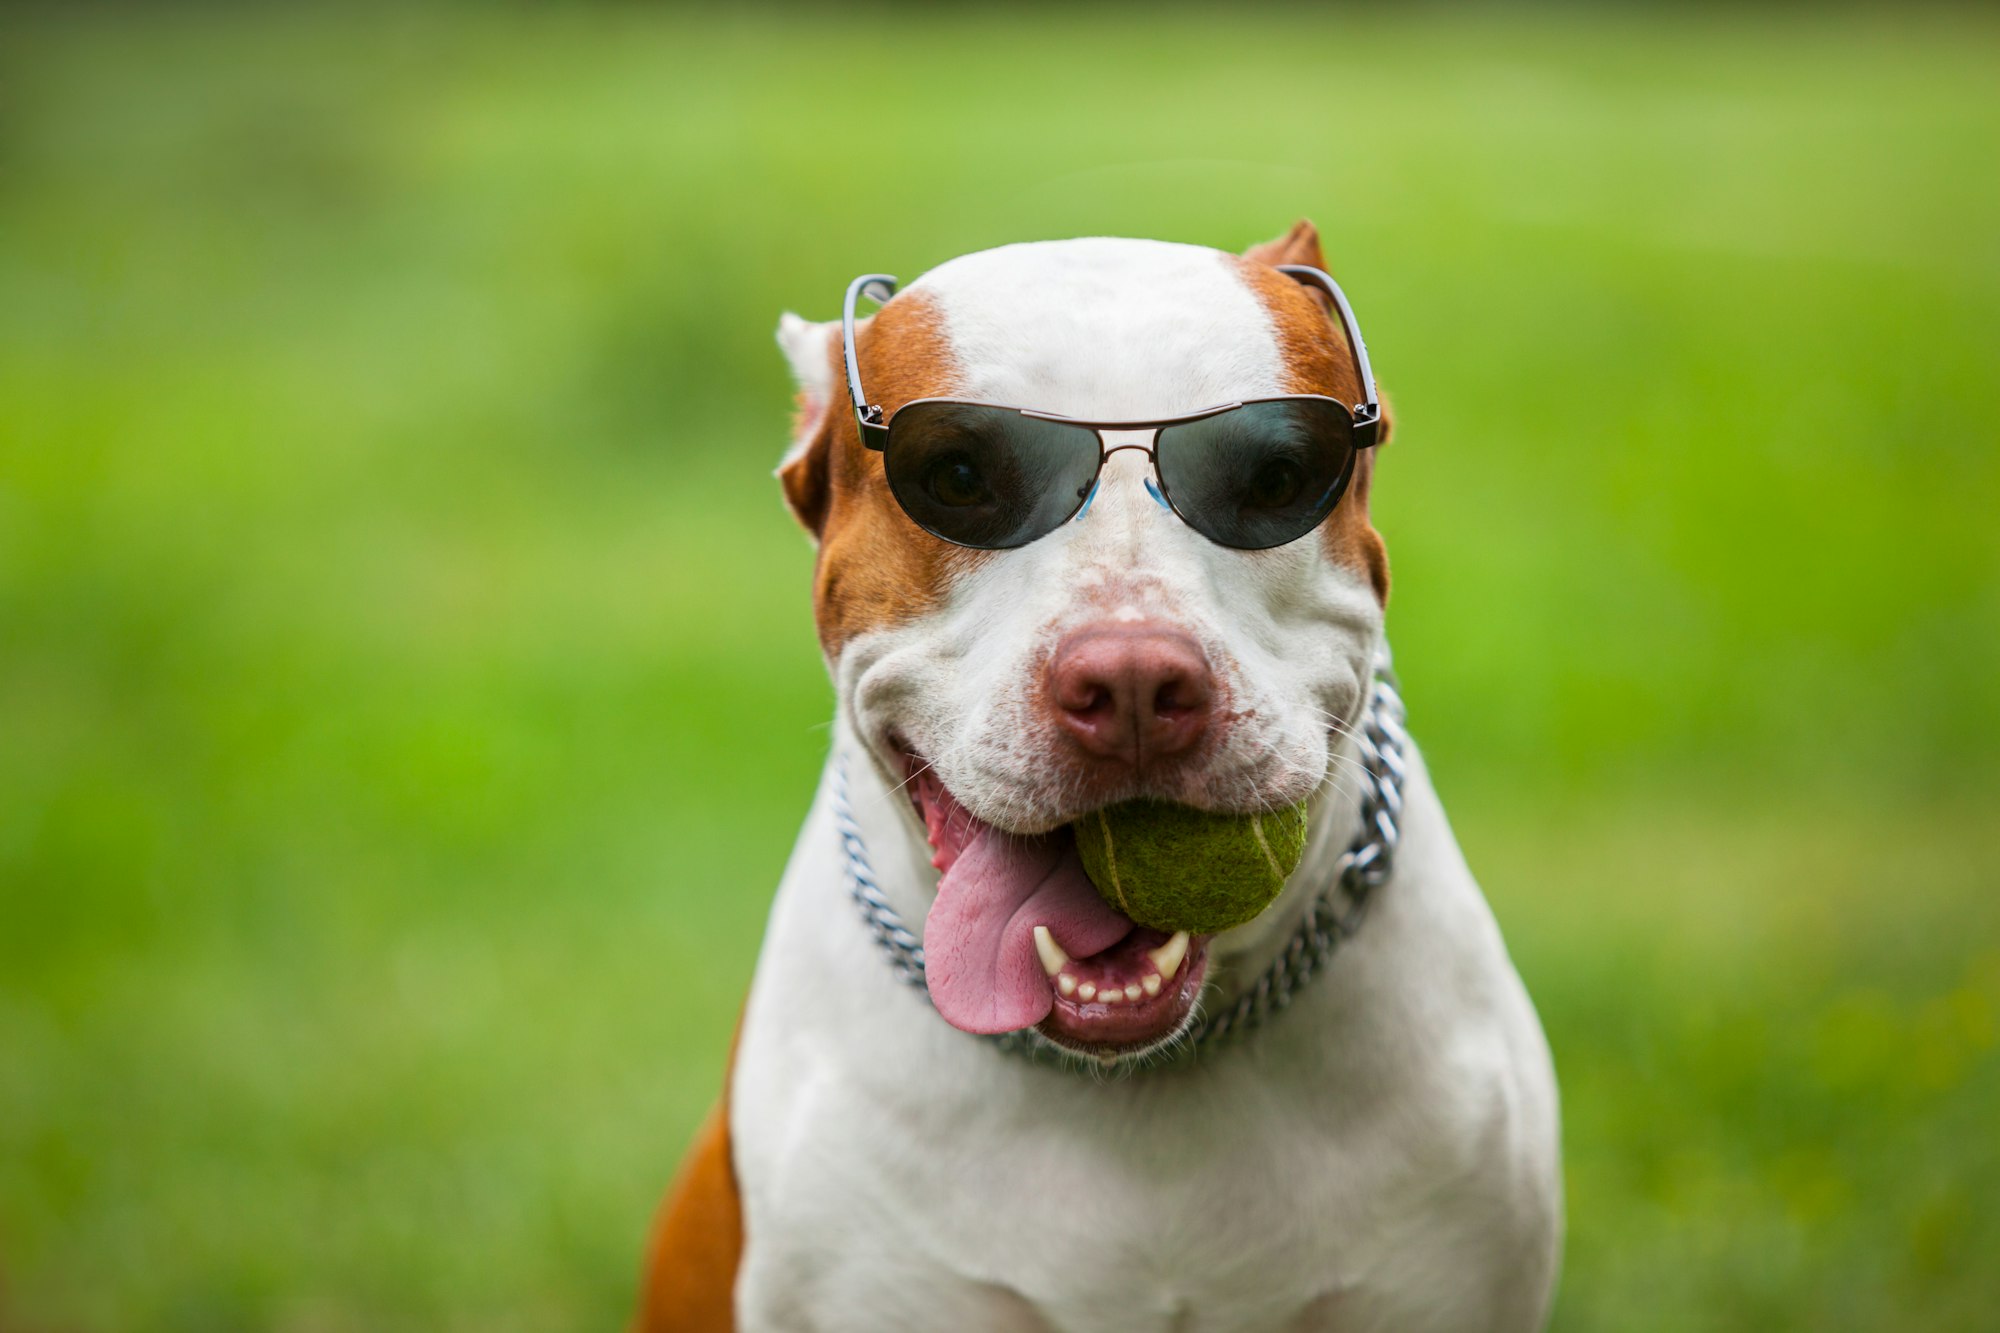 Adorable funny dog wearing sunglasses